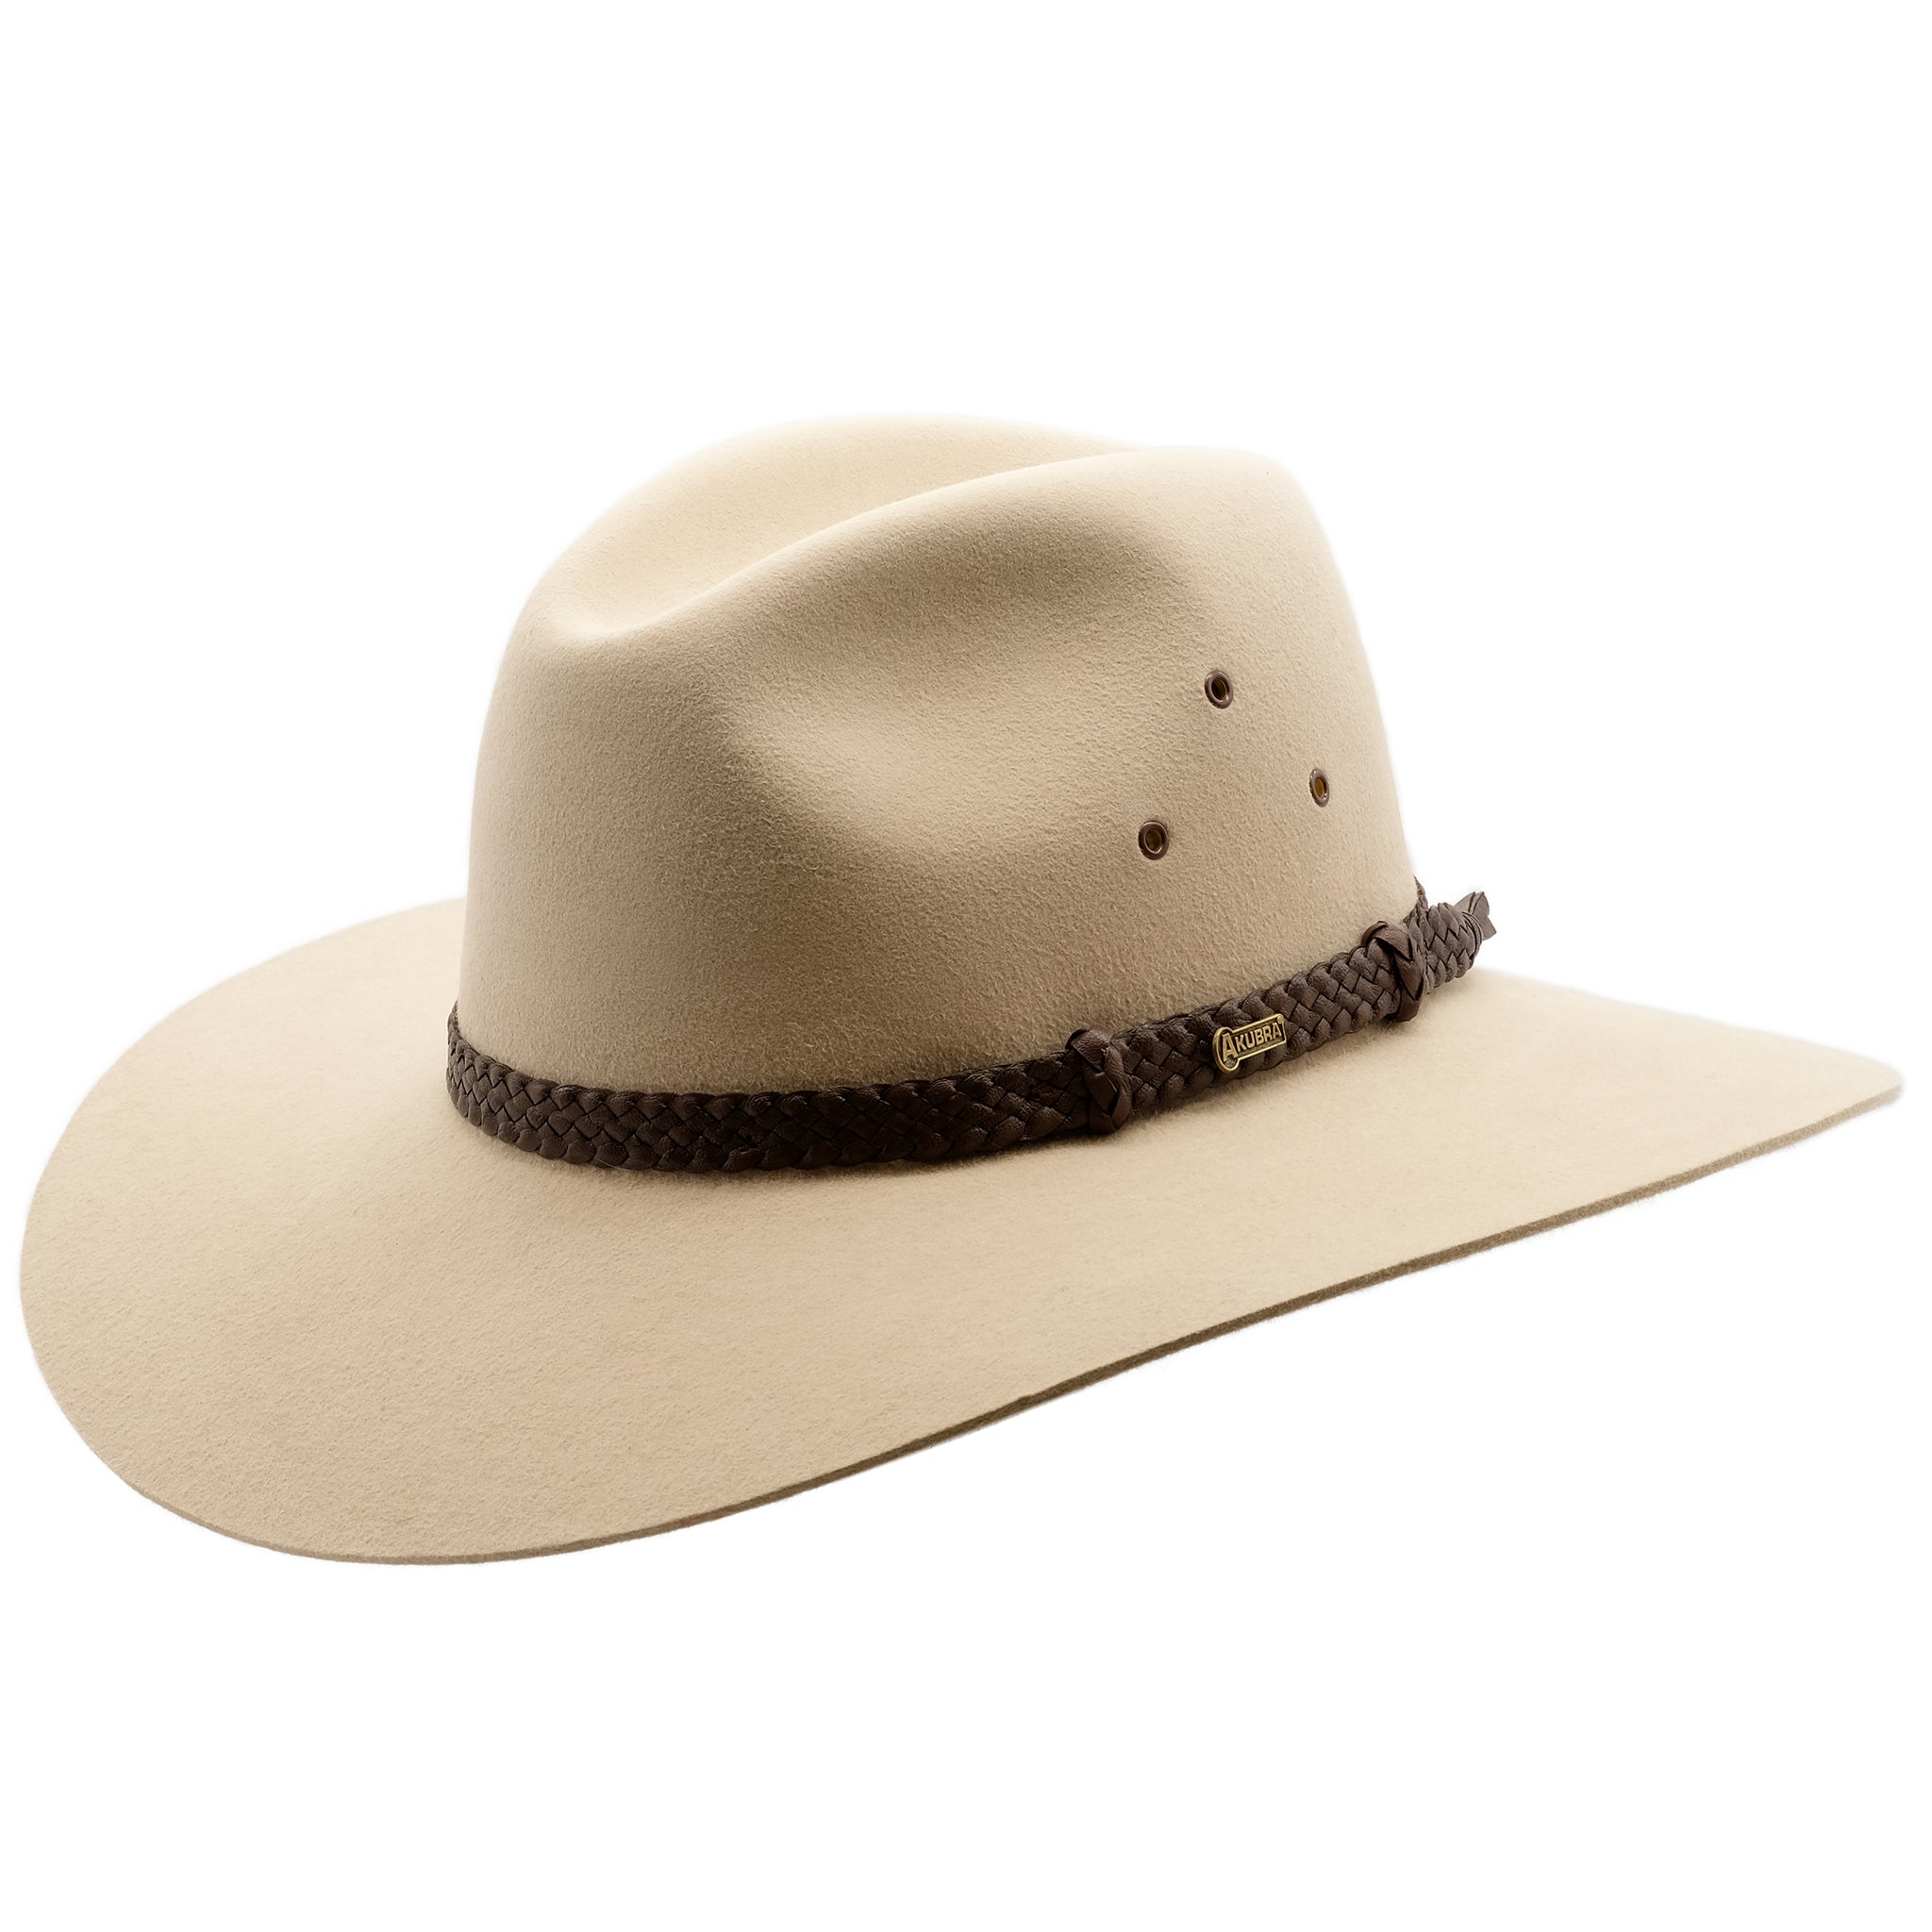 Angle view of Akubra Riverina hat in Sand colour